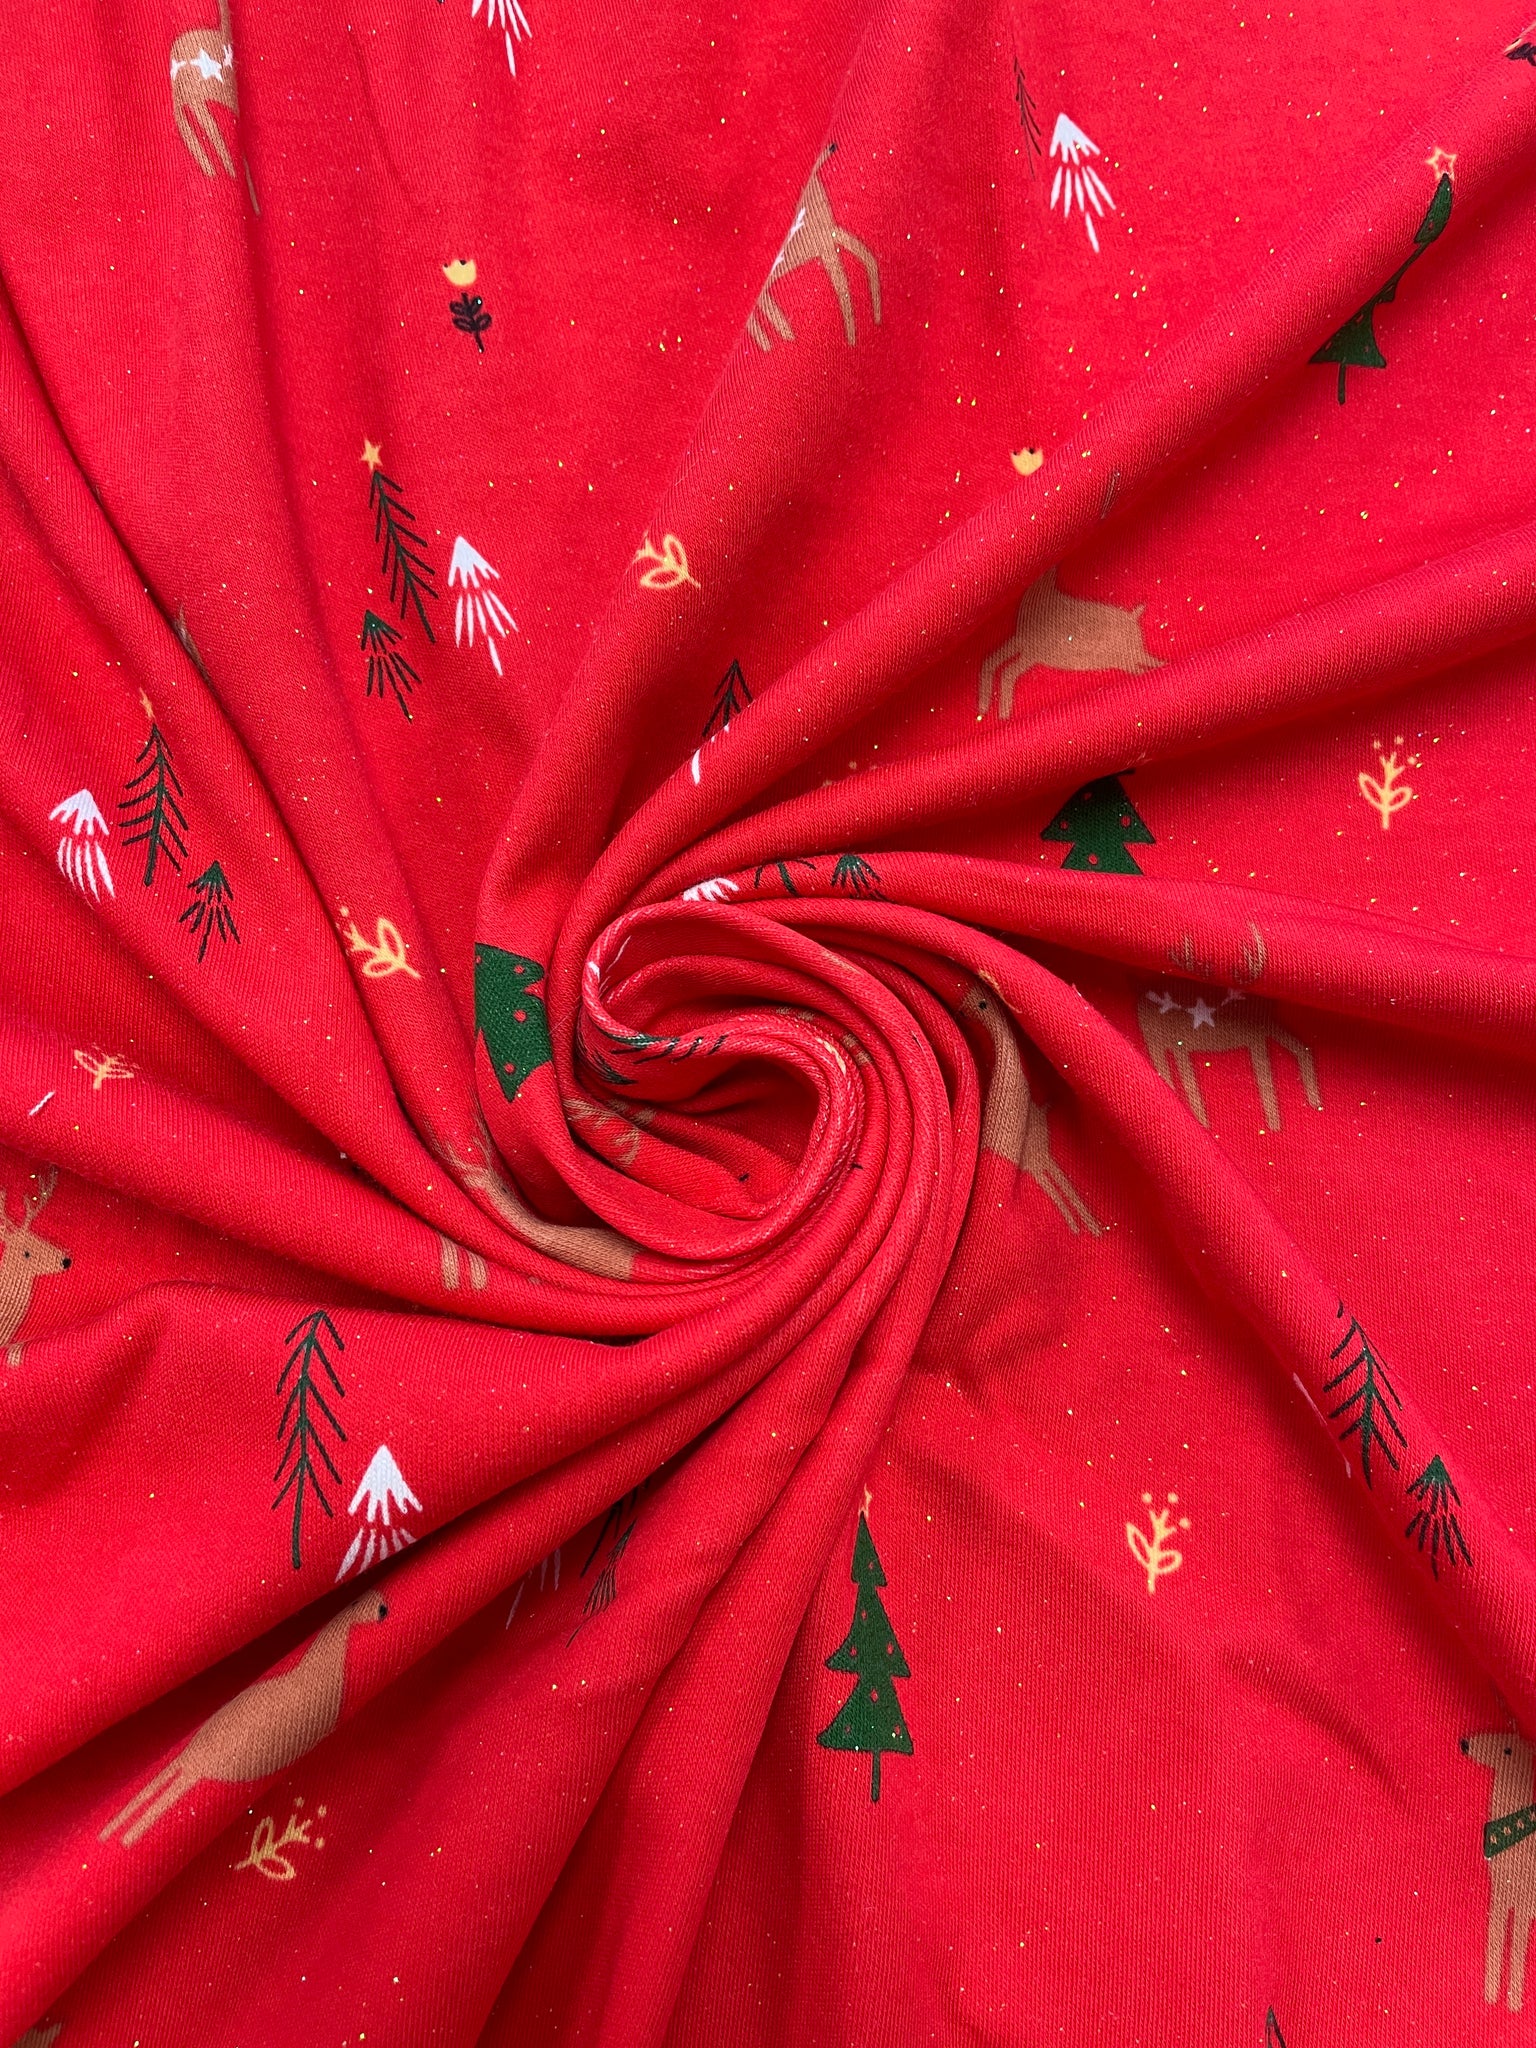 7/8 YD Cotton/Spandex Remnant - Red with Reindeer, Christmas Trees and Flowers